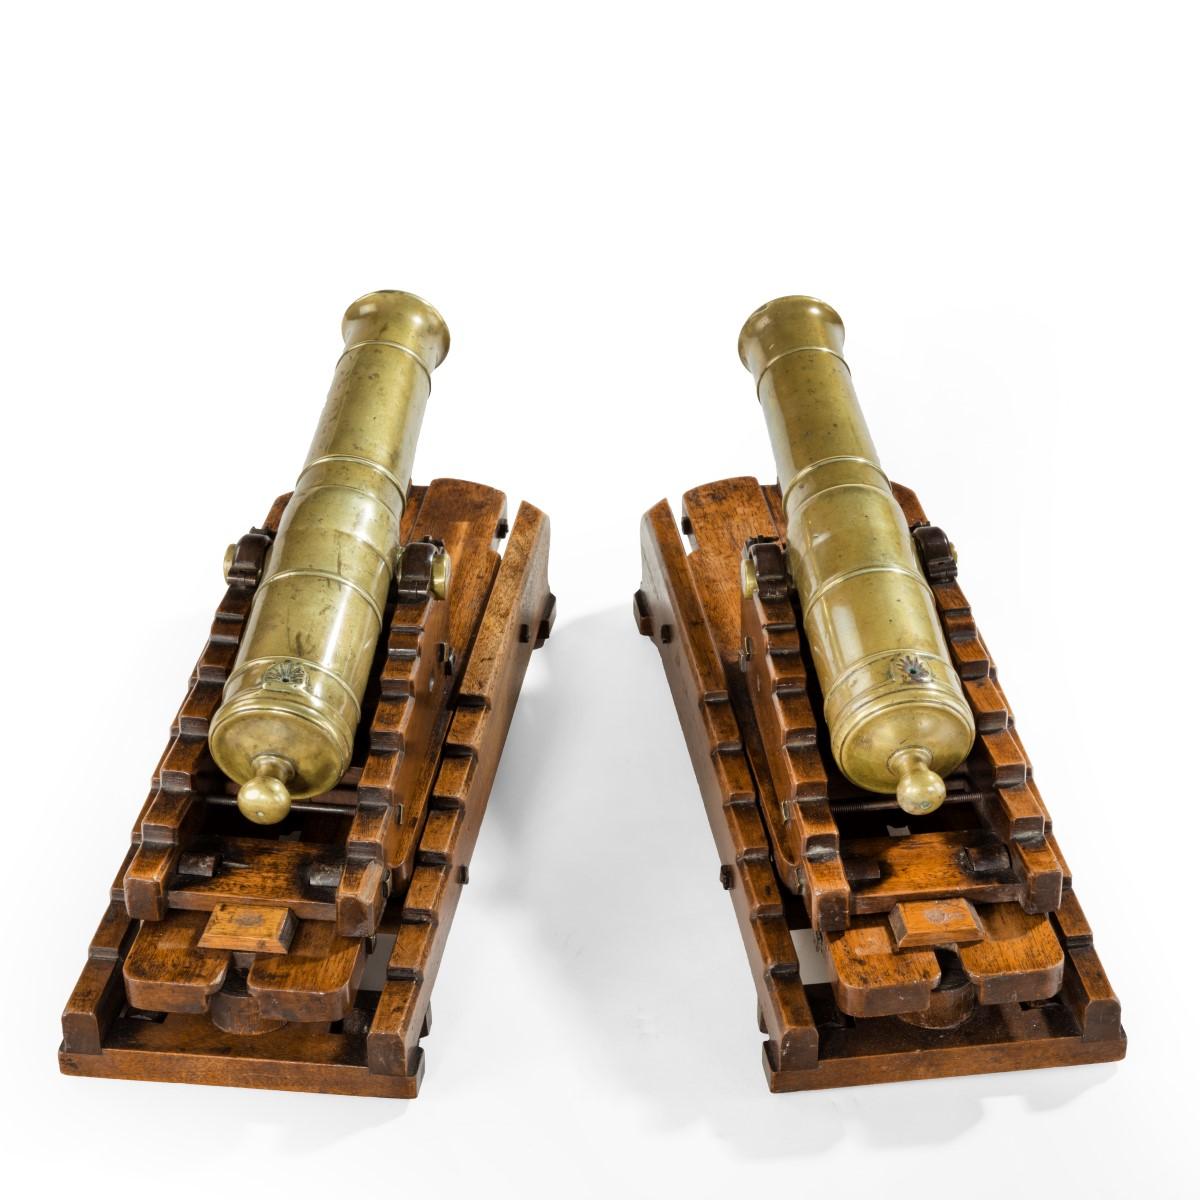 A pair of brass 19th century models of ship’s 32-pounder cannon